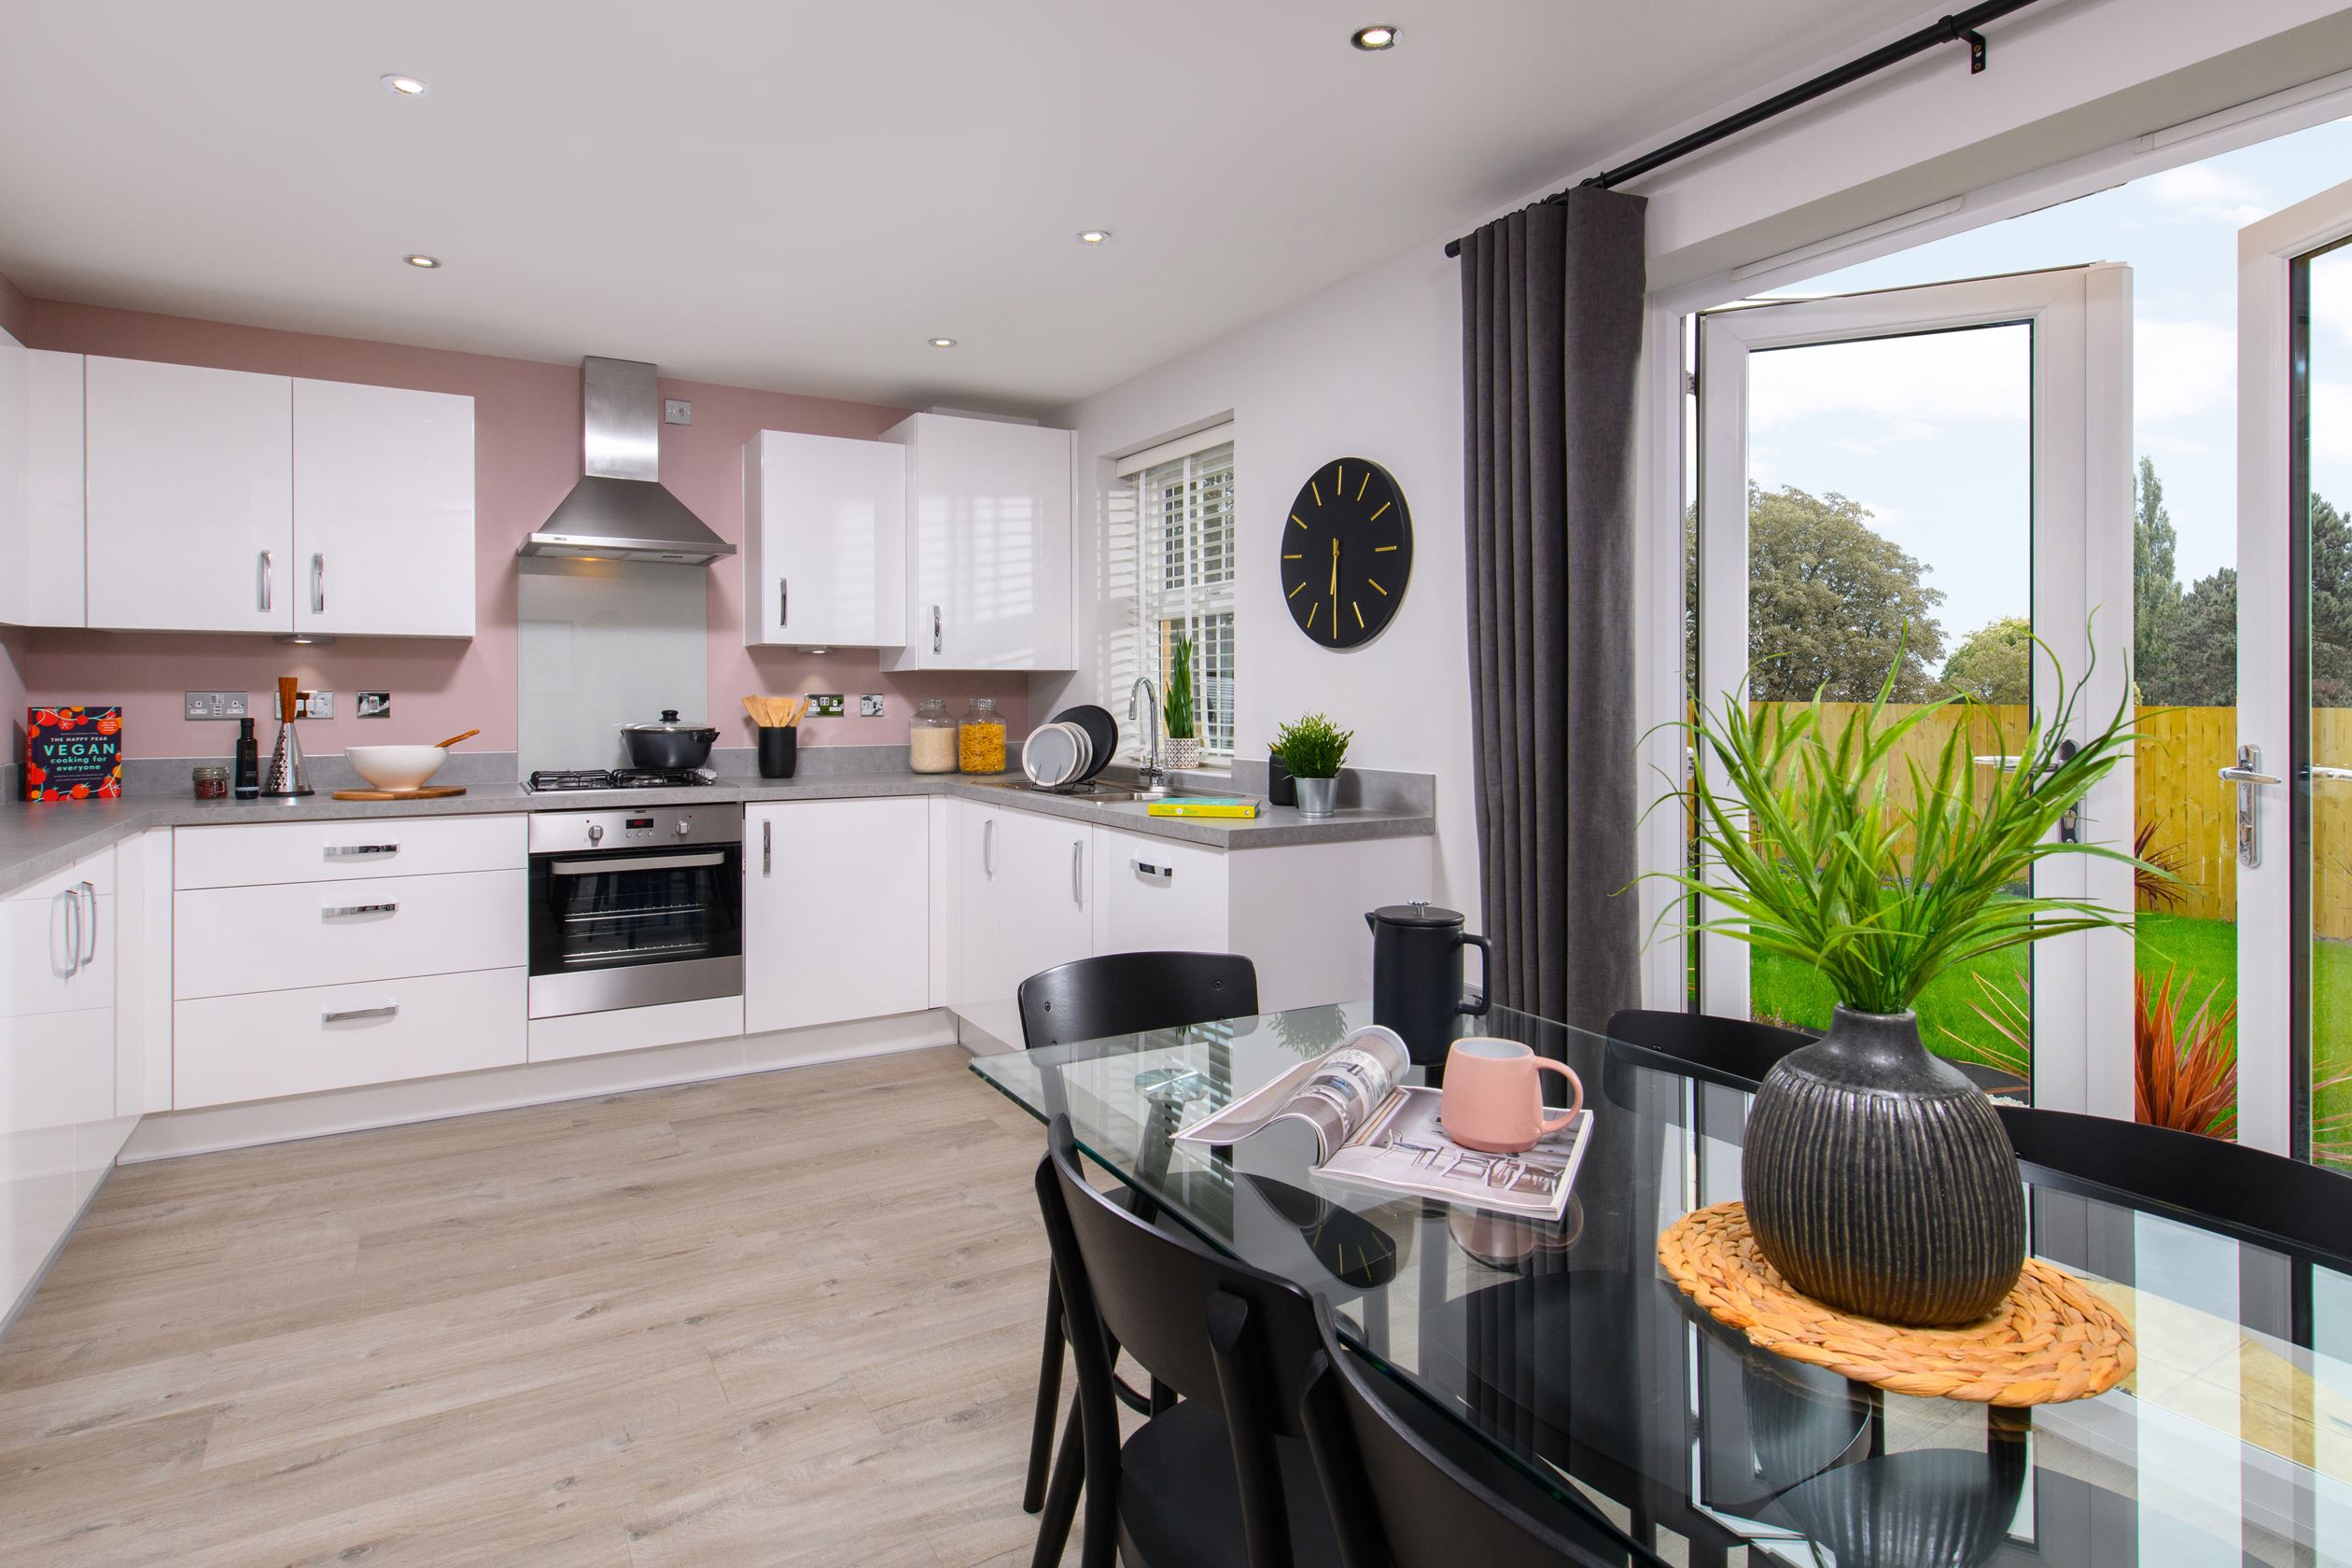 Property 2 of 8. The Archford Show Home Kitchen With French Doors To The Garden